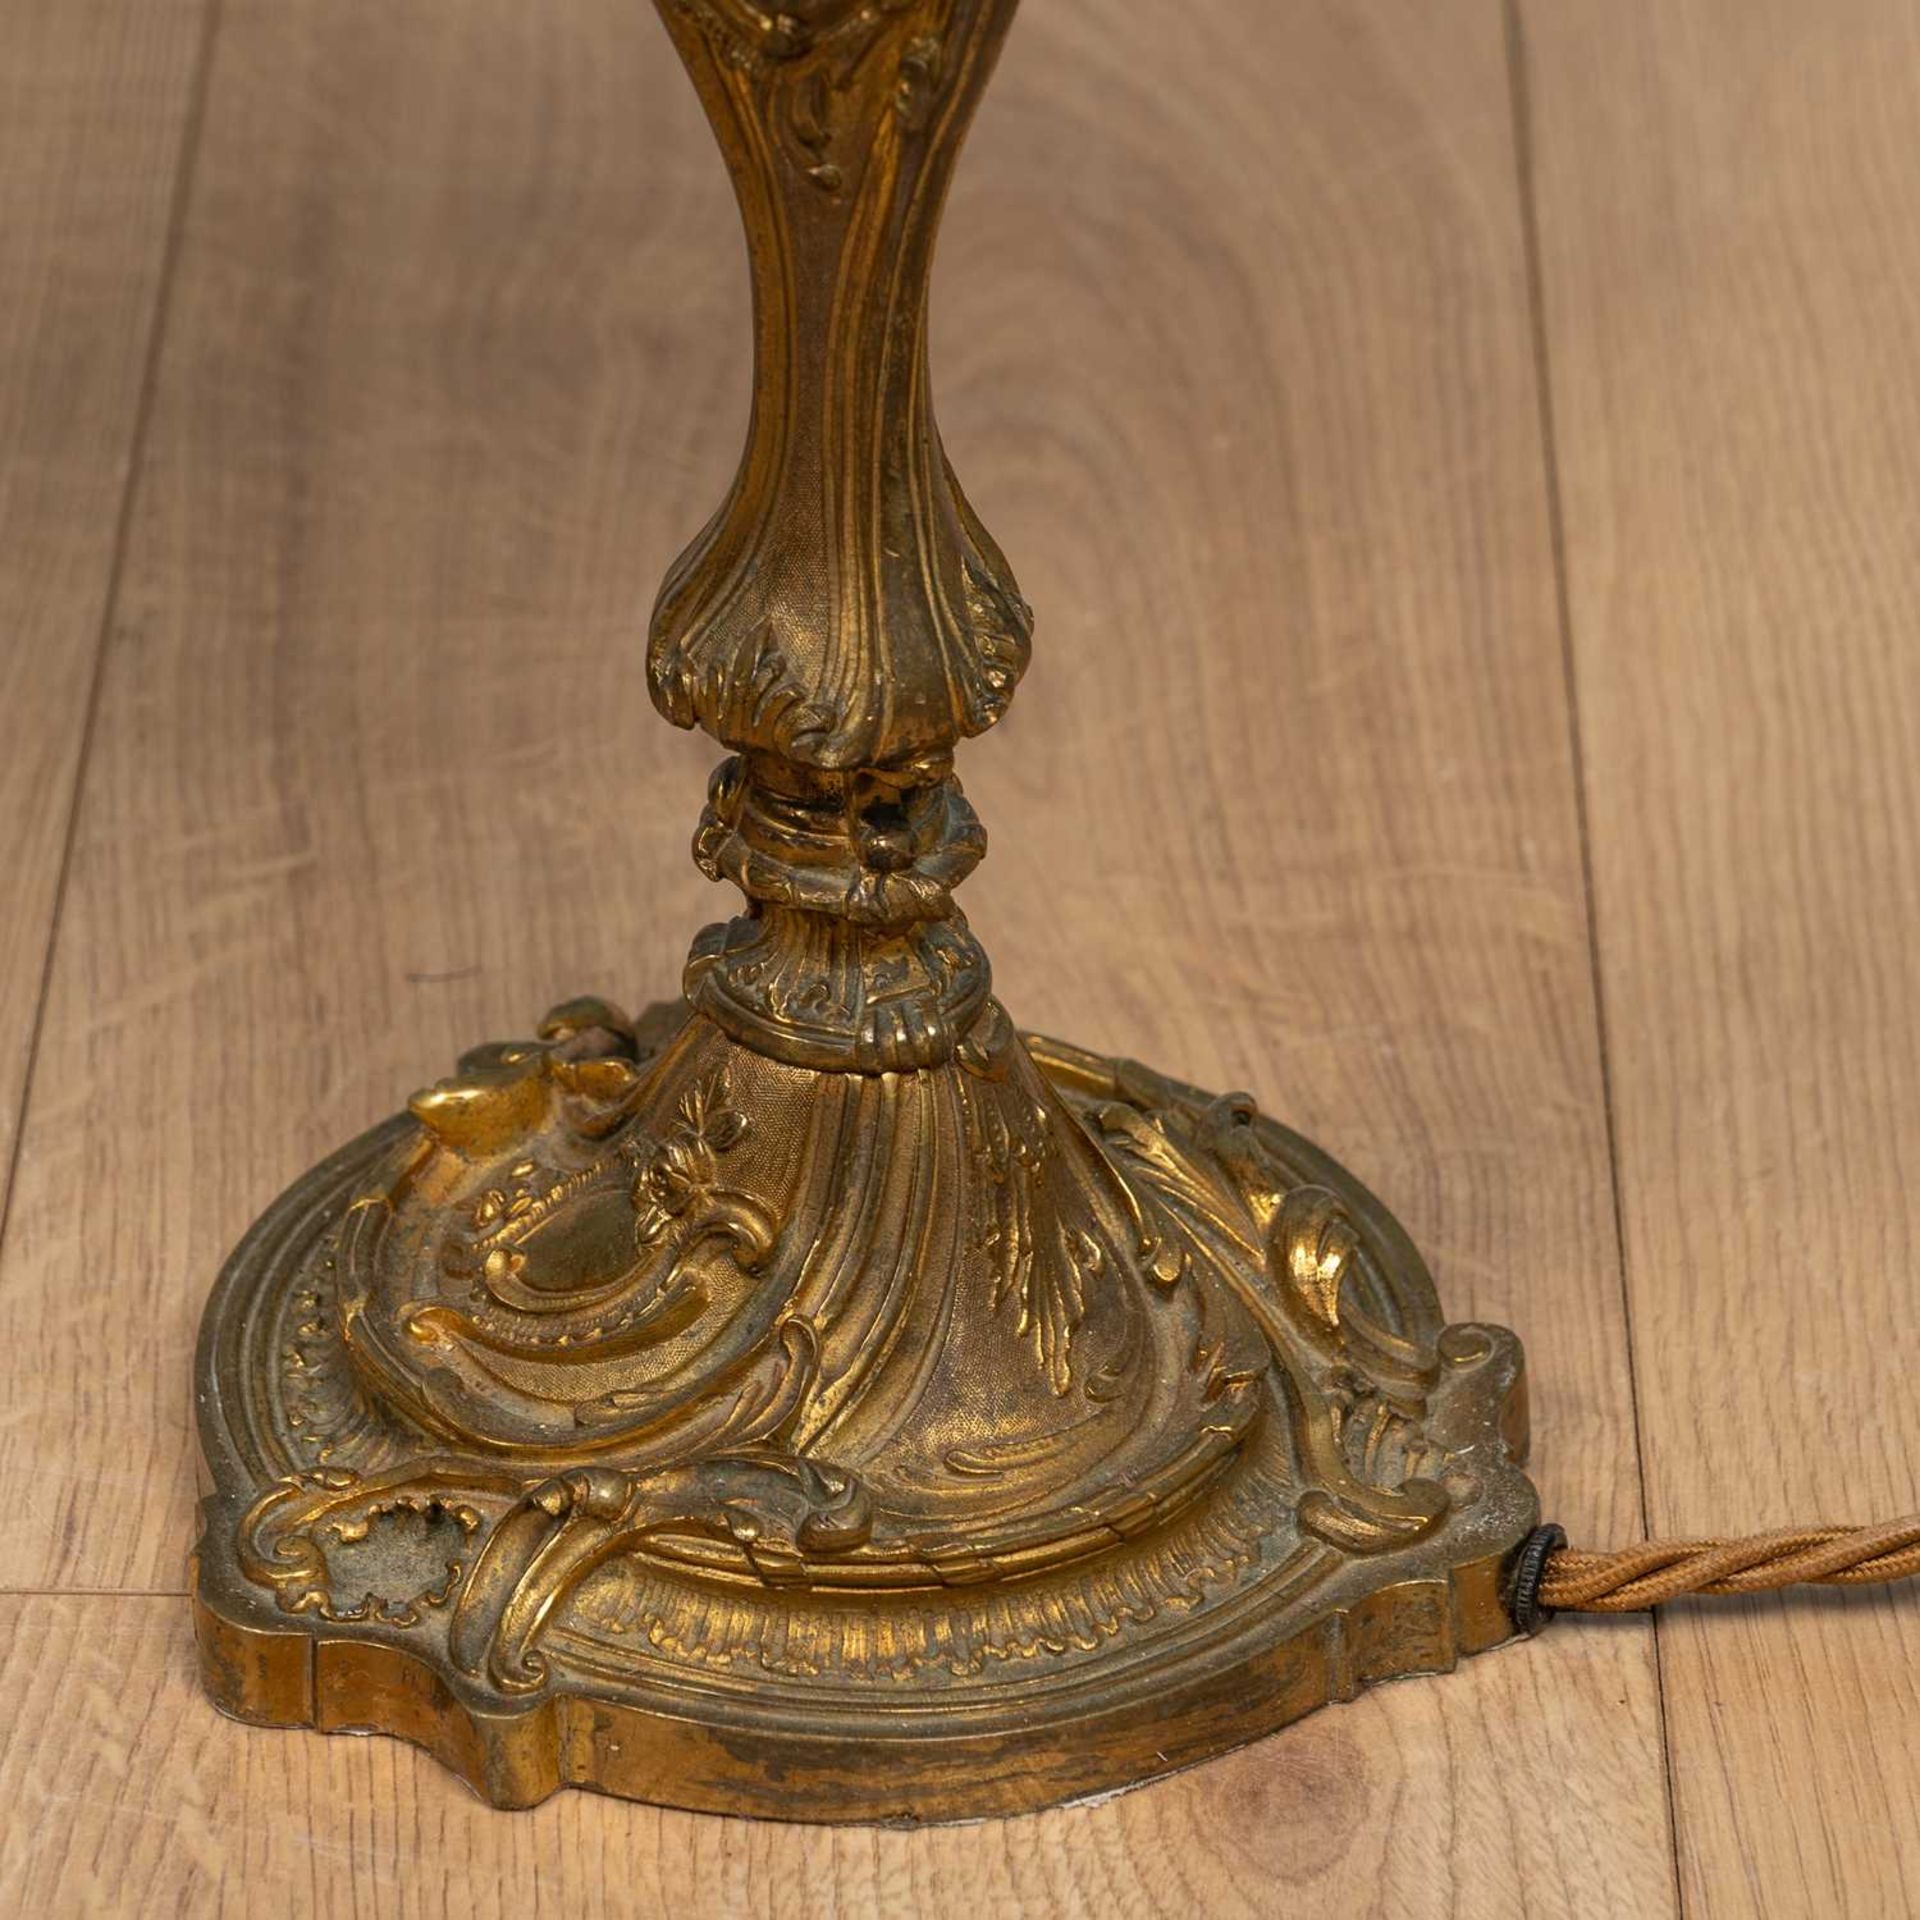 A pair of Rococo style continental gilt metal candelabra style lamp holders - Image 3 of 5